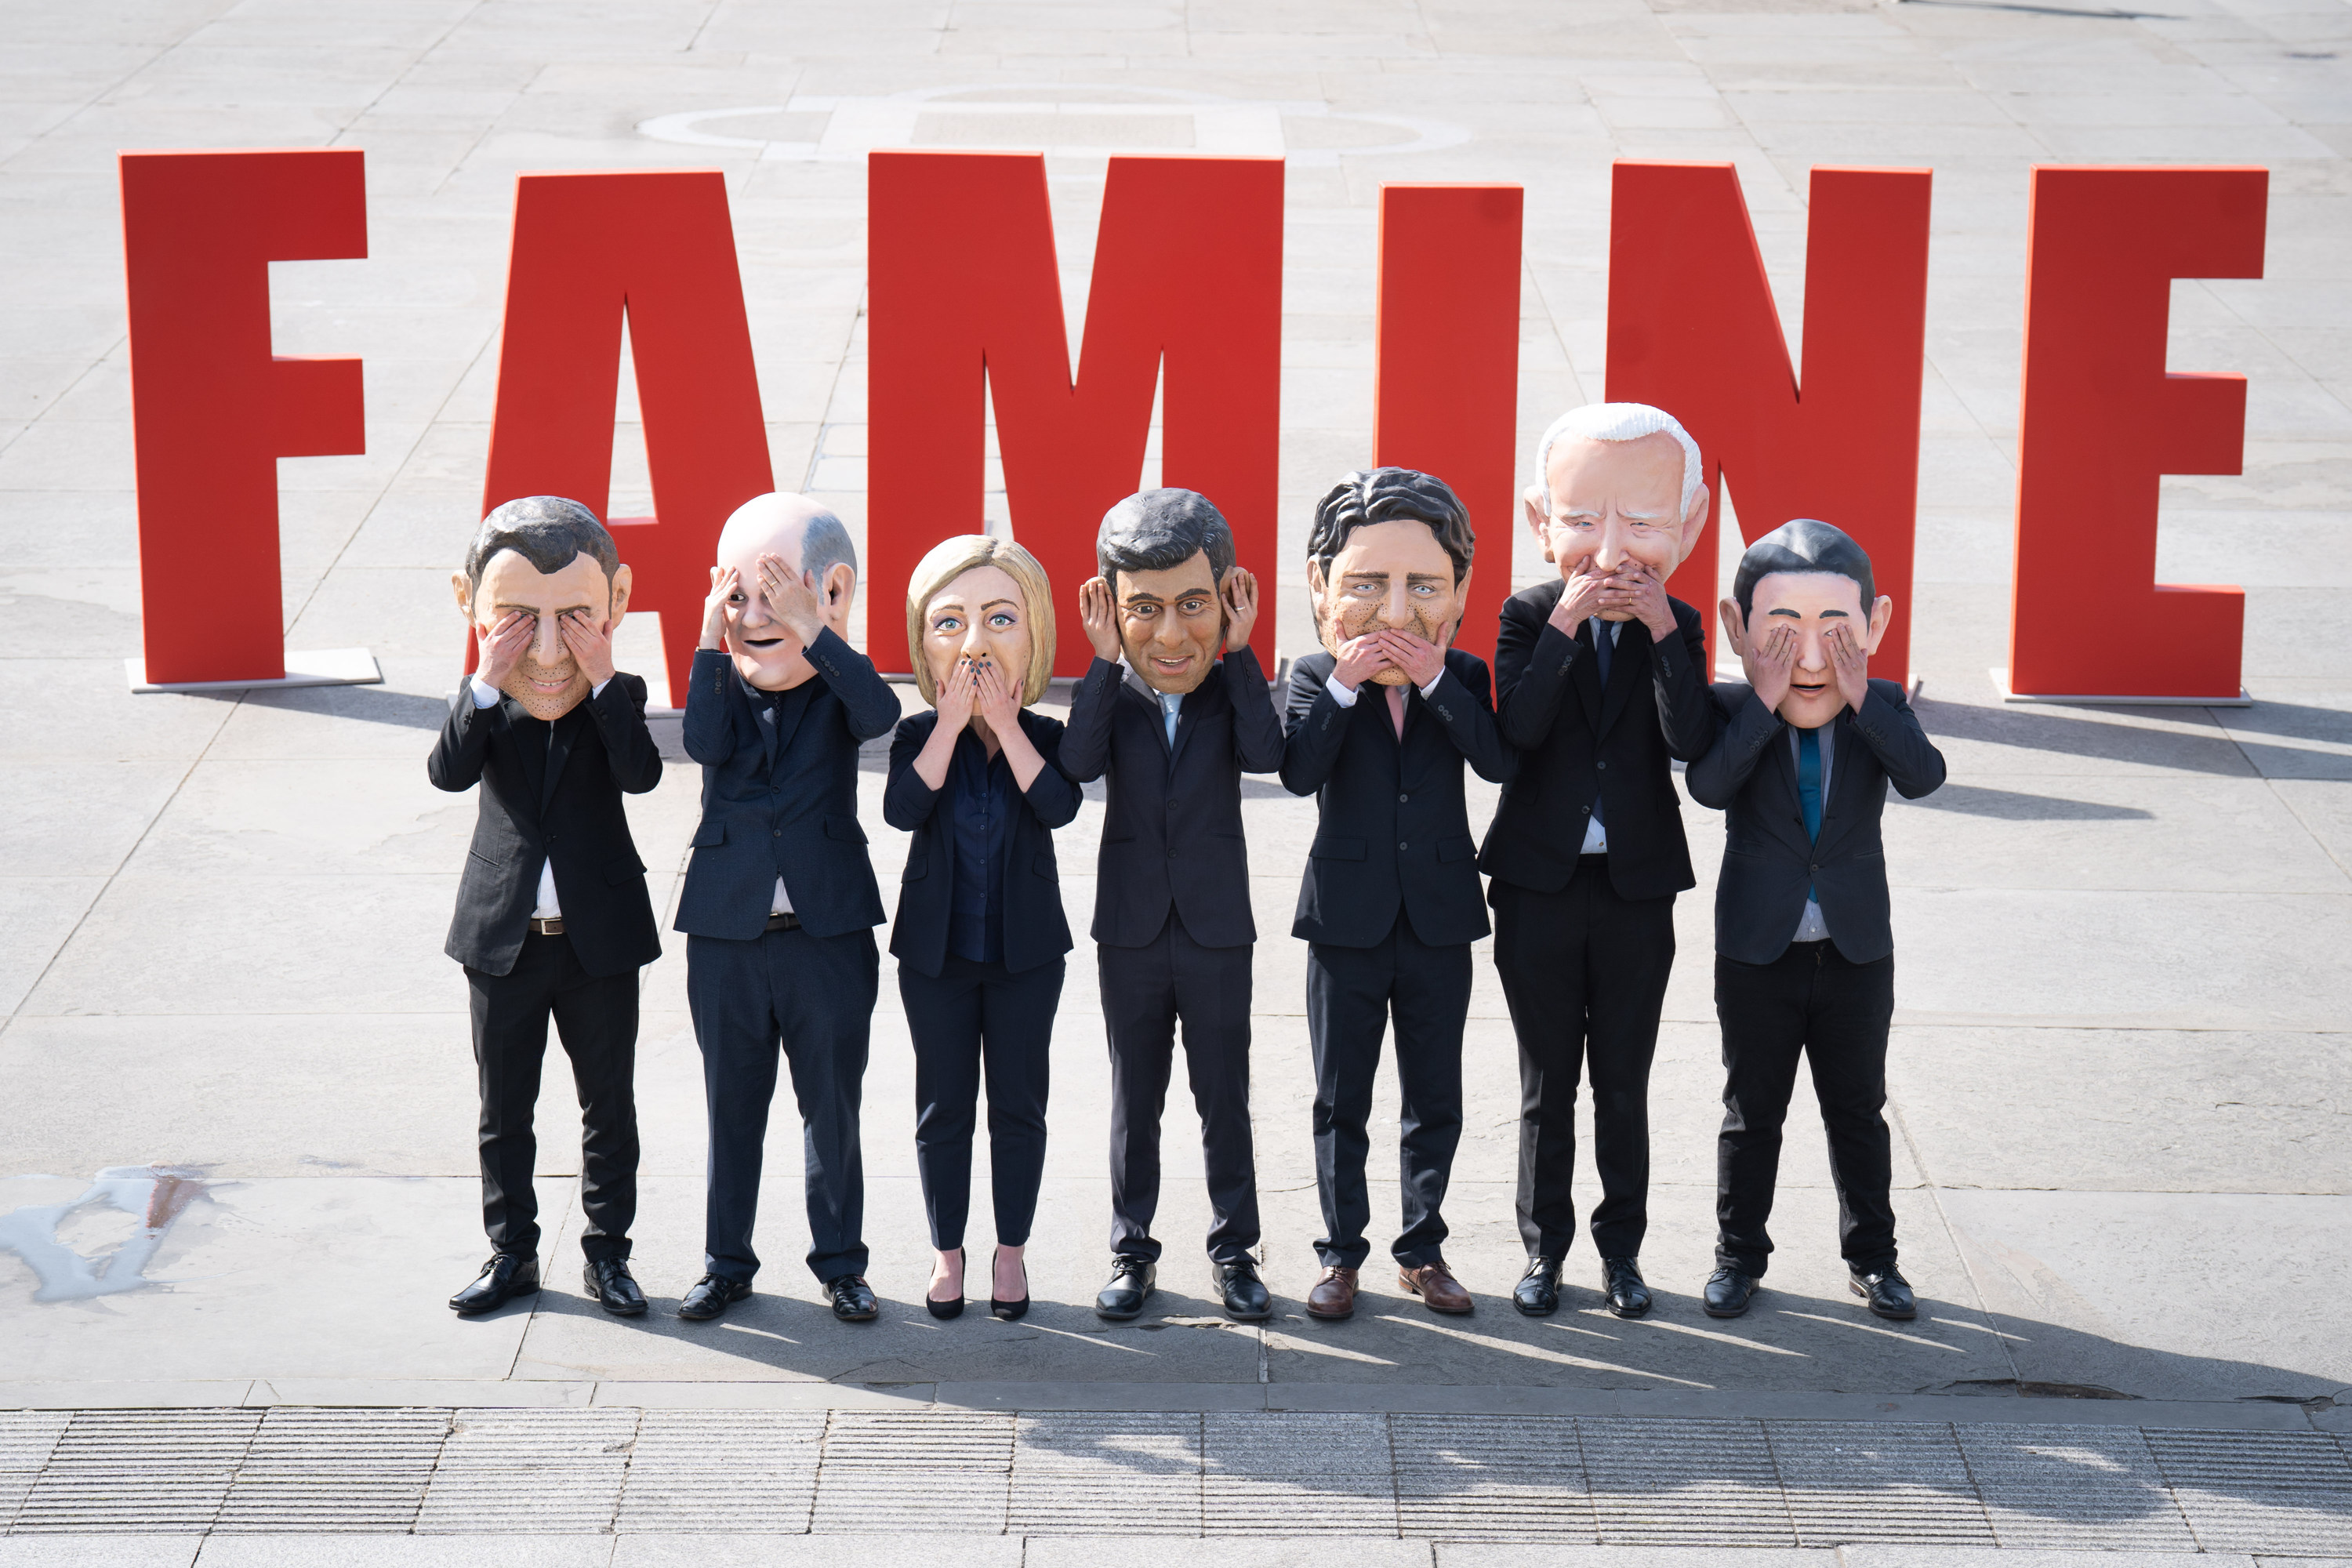 Oxfam activists wearing masks of G7 leaders to highlight their lack of action to tackle the East Africa hunger crisis. Photo: dpa